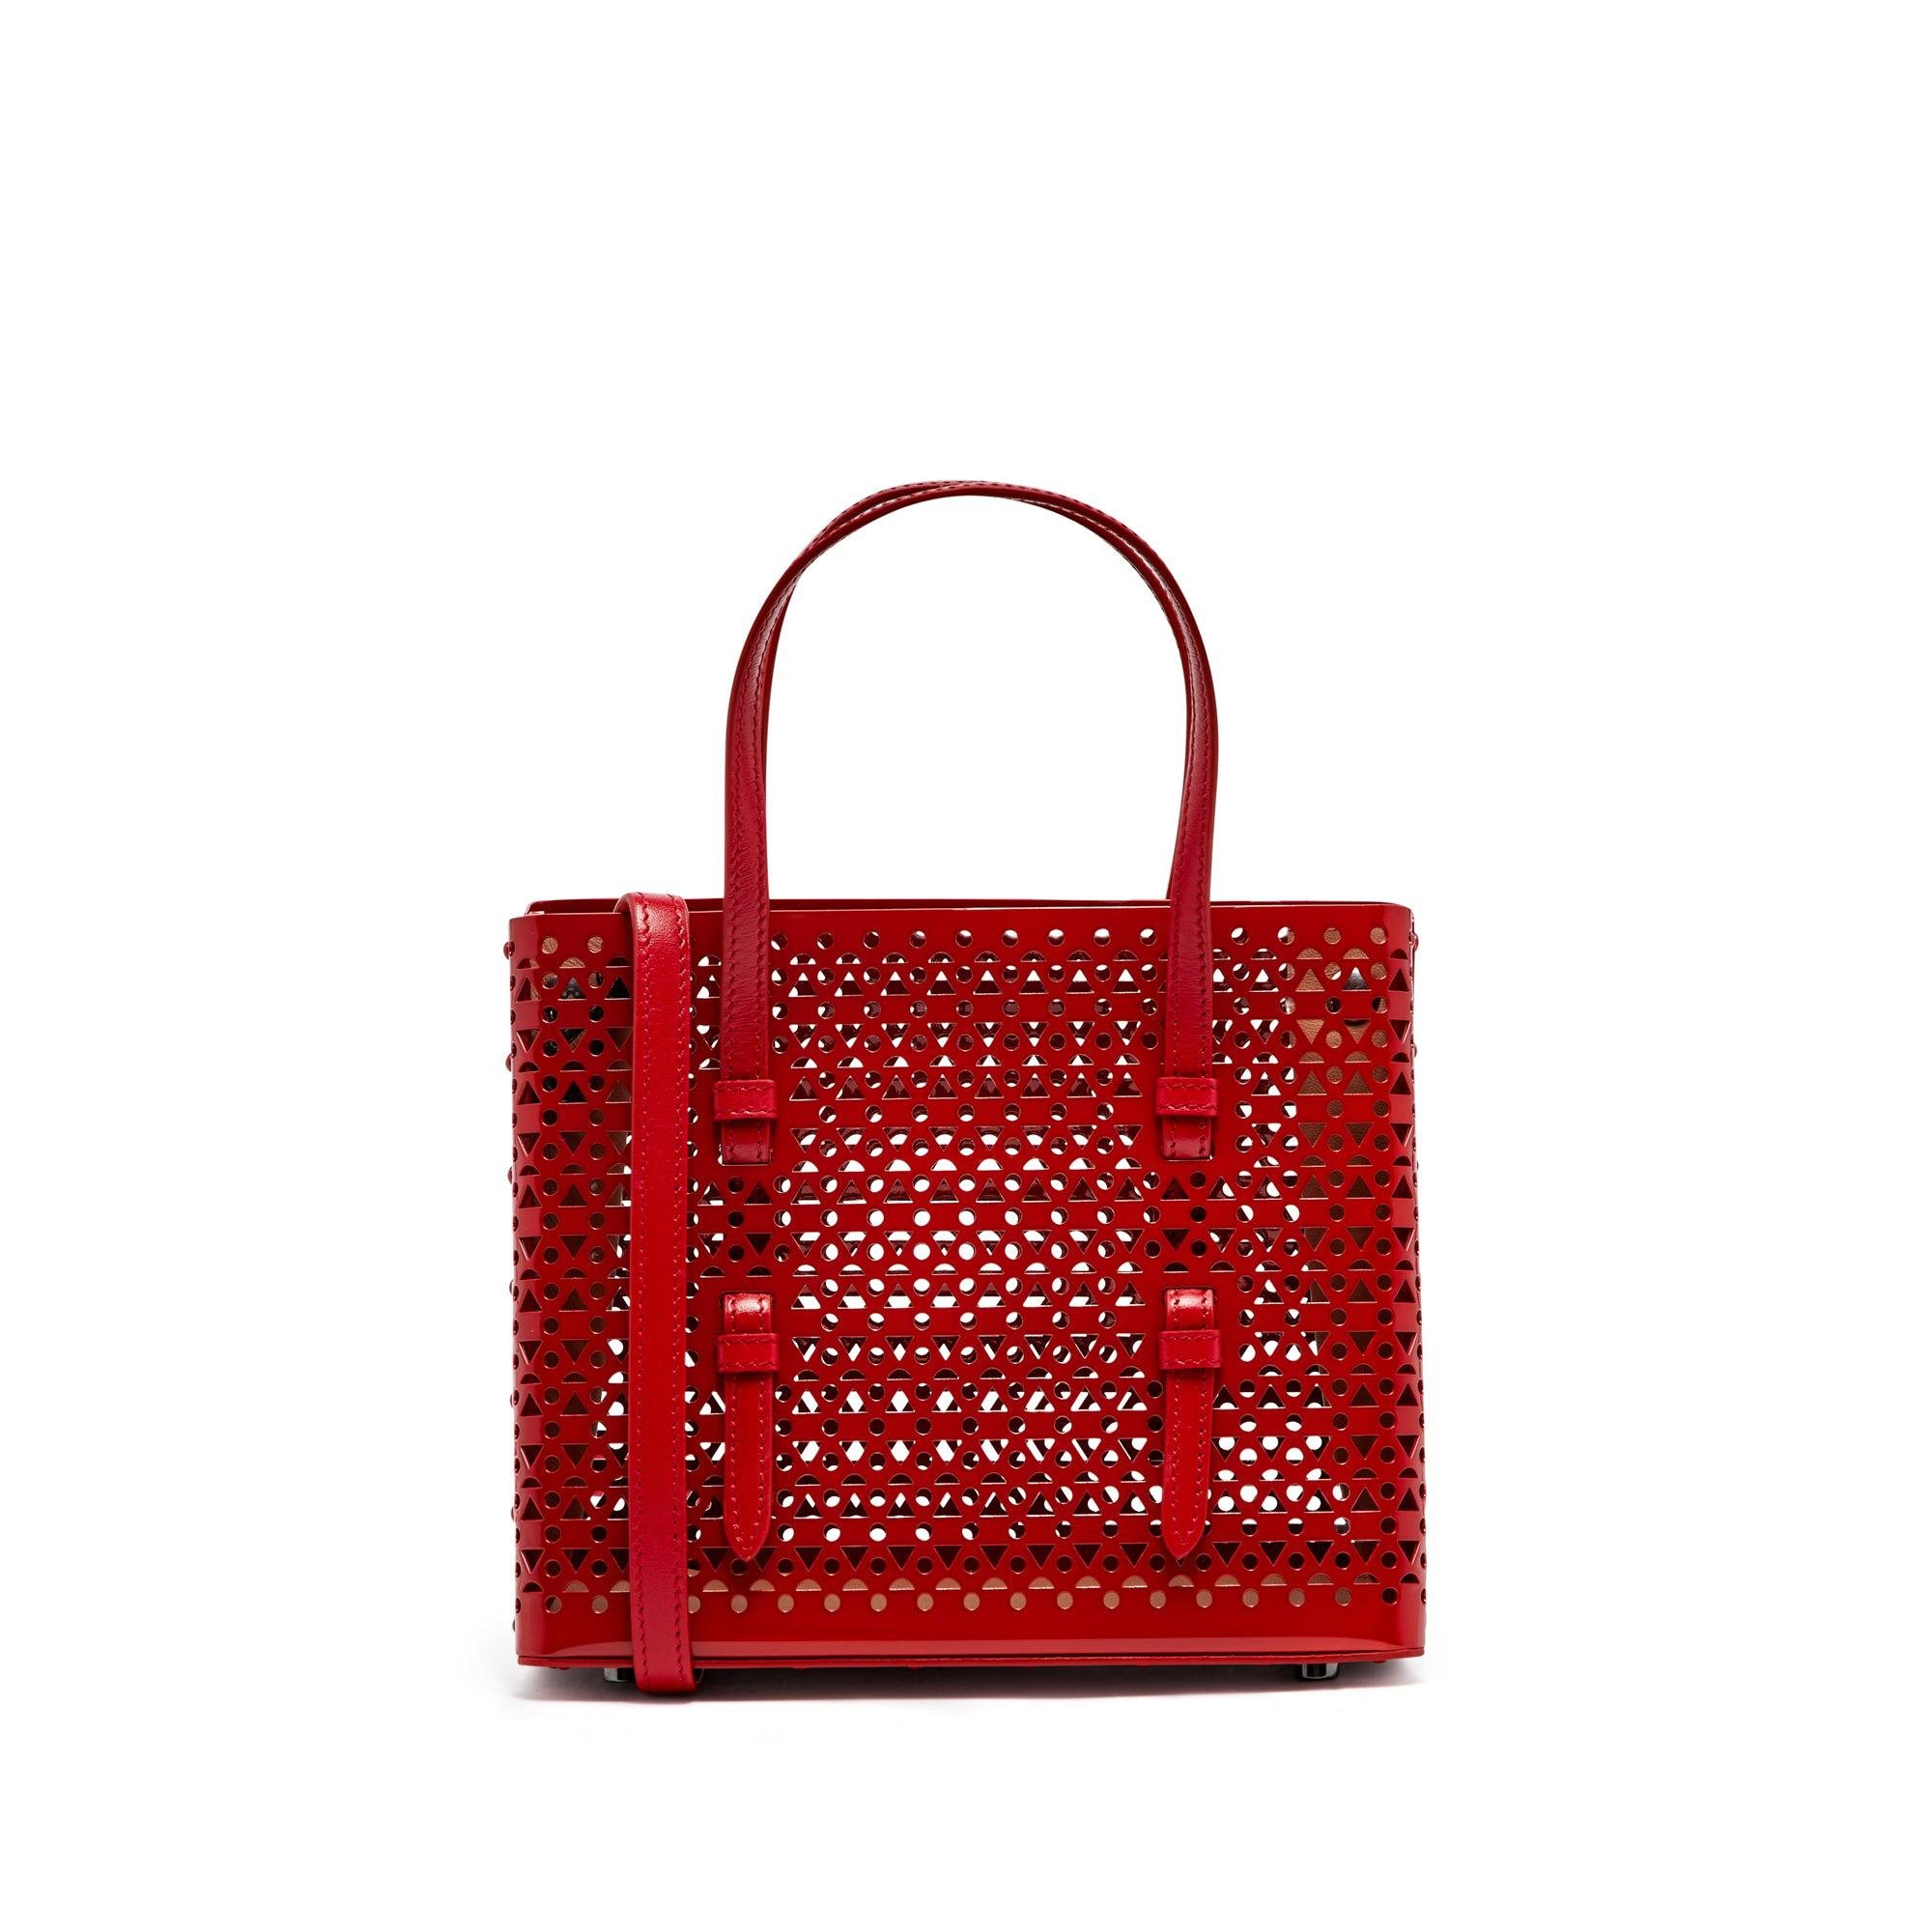 Alaïa - Women’s Mina 20 Small Tote Bag - (Lacquer Red) by ALAIA